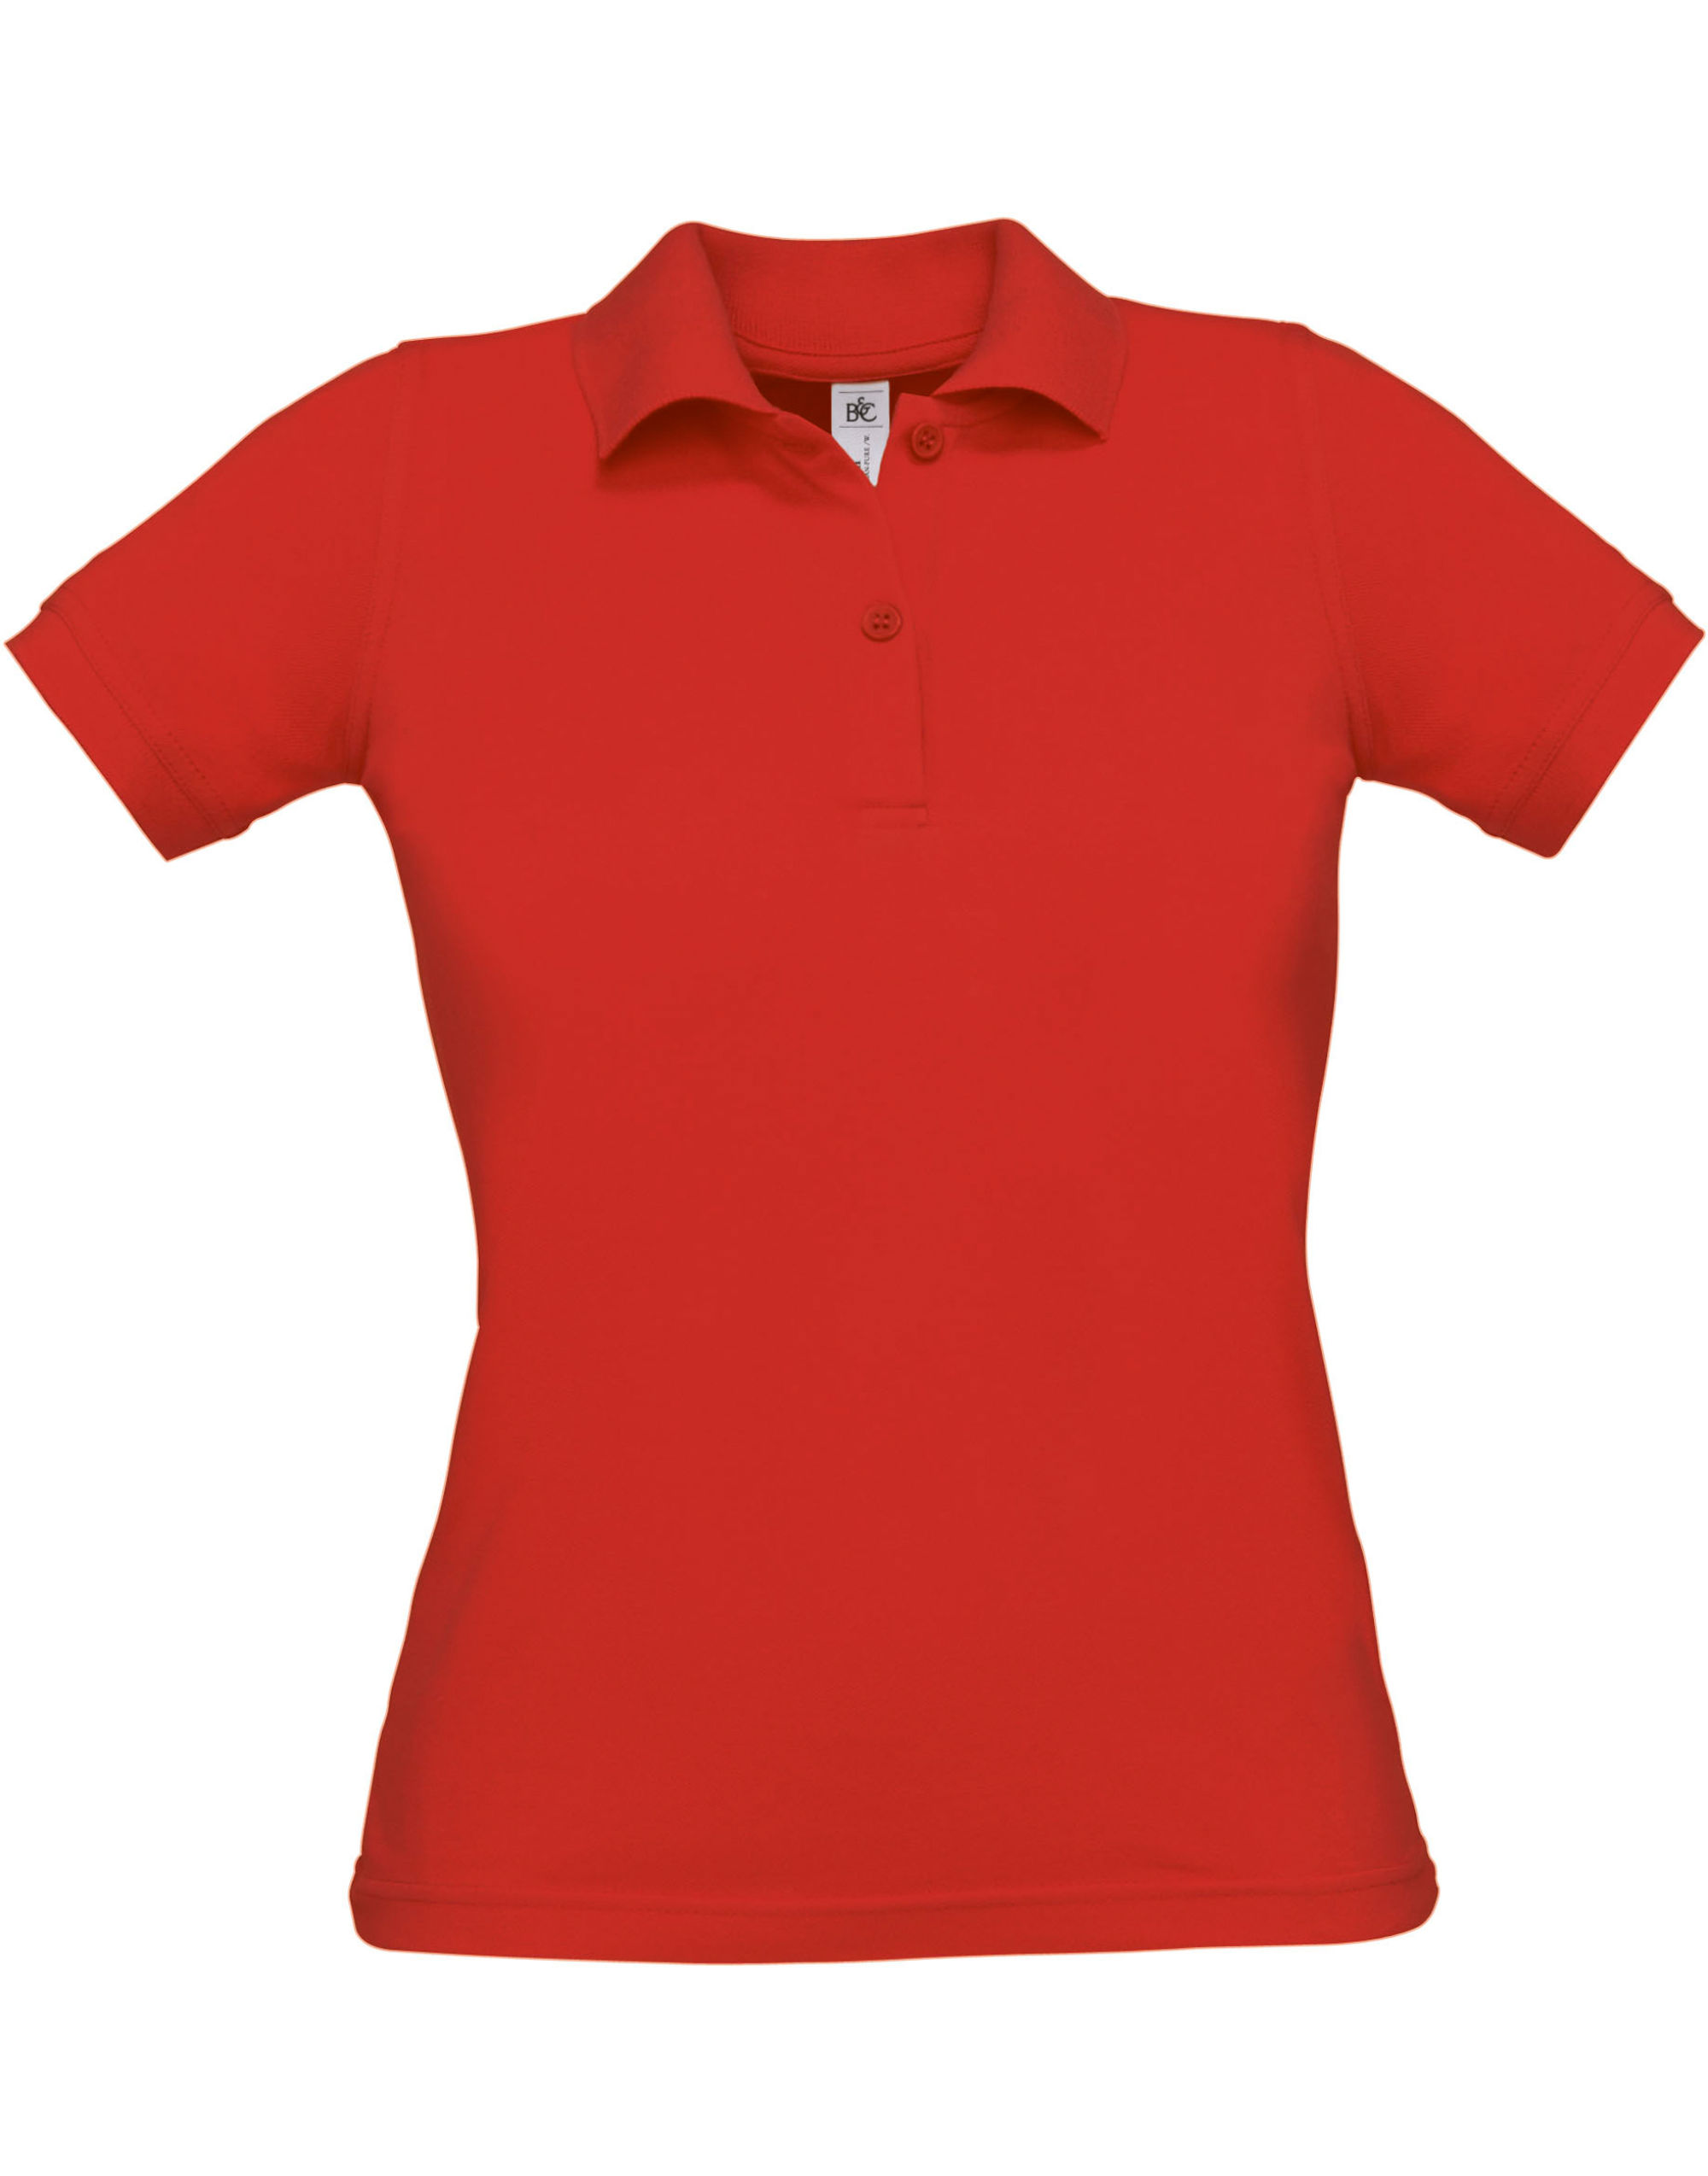 PW455RED2XL